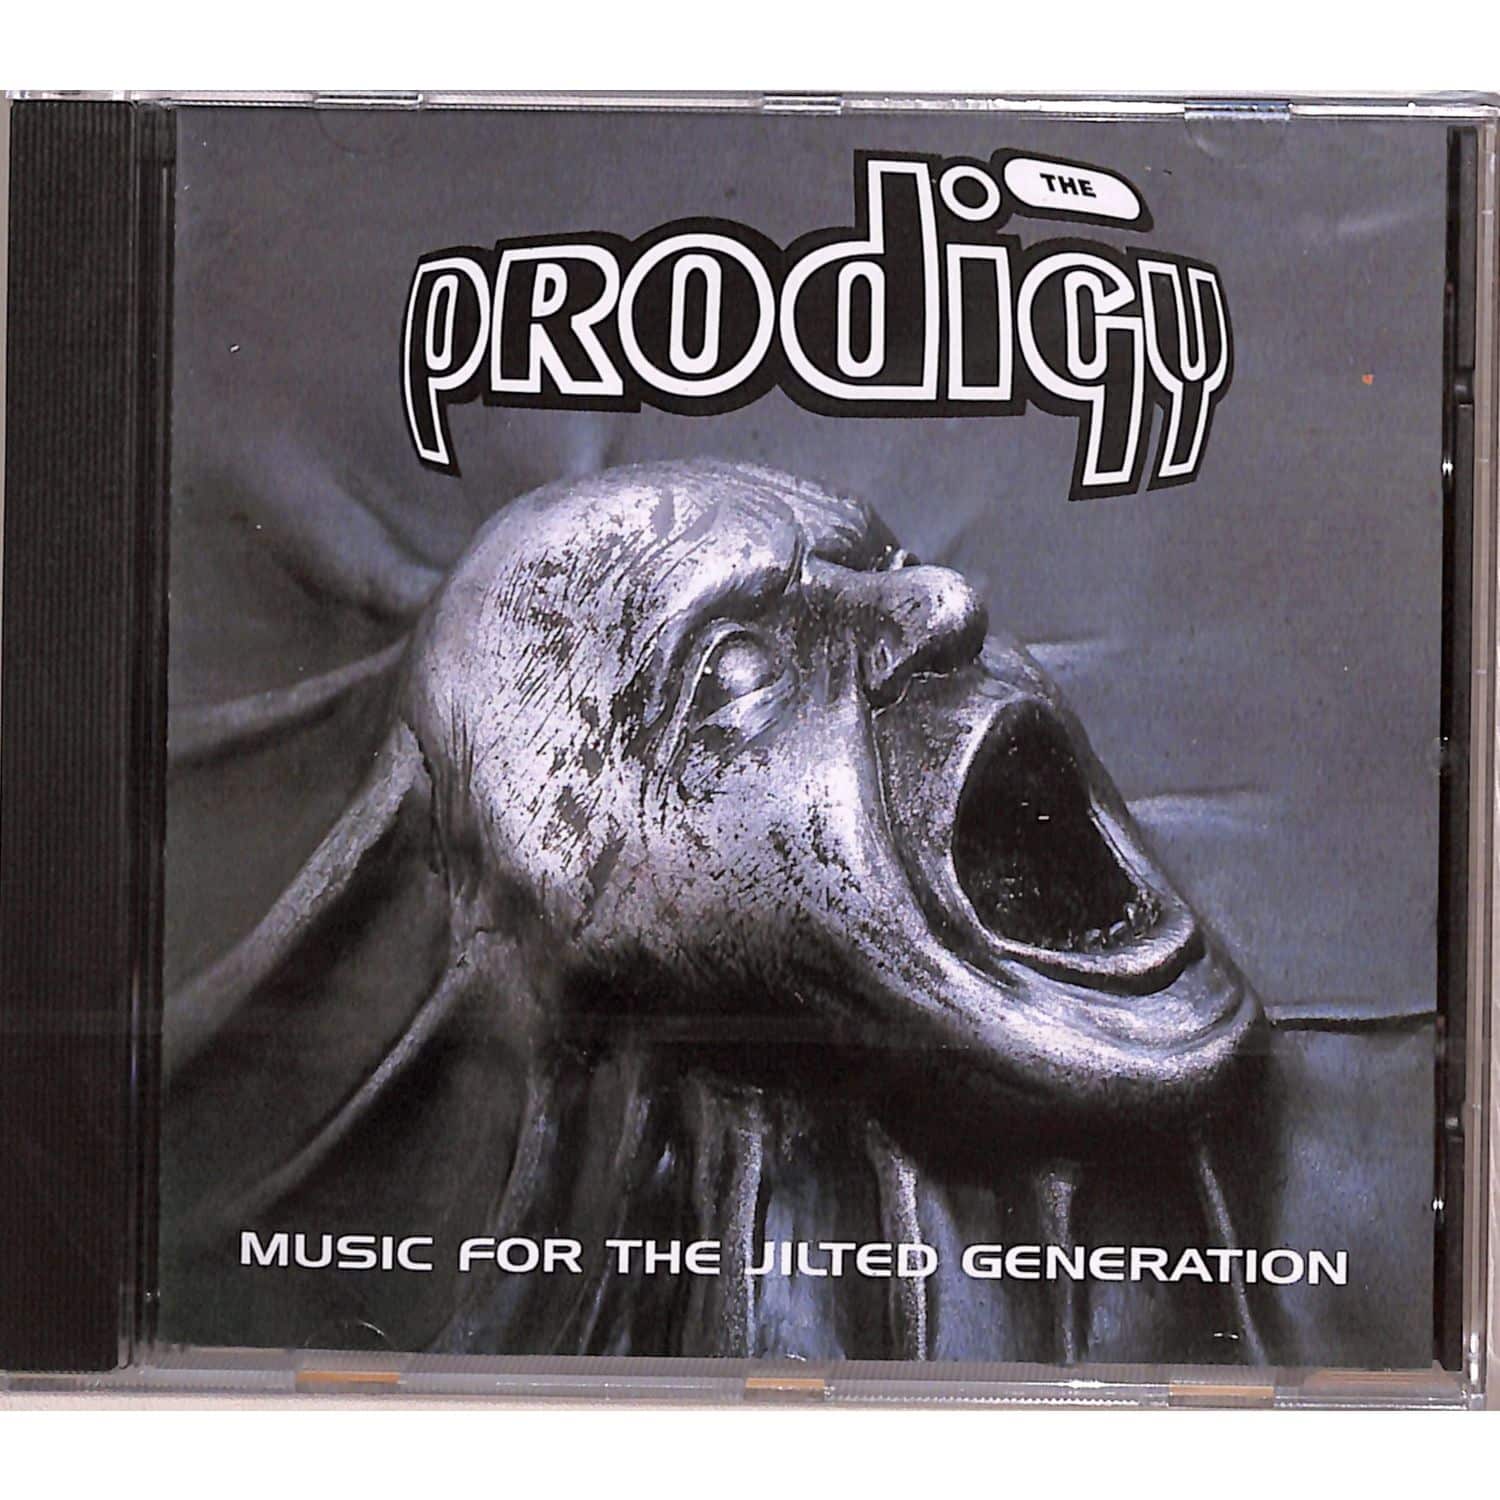 The Prodigy - MUSIC FOR THE JILTED GENERATION 